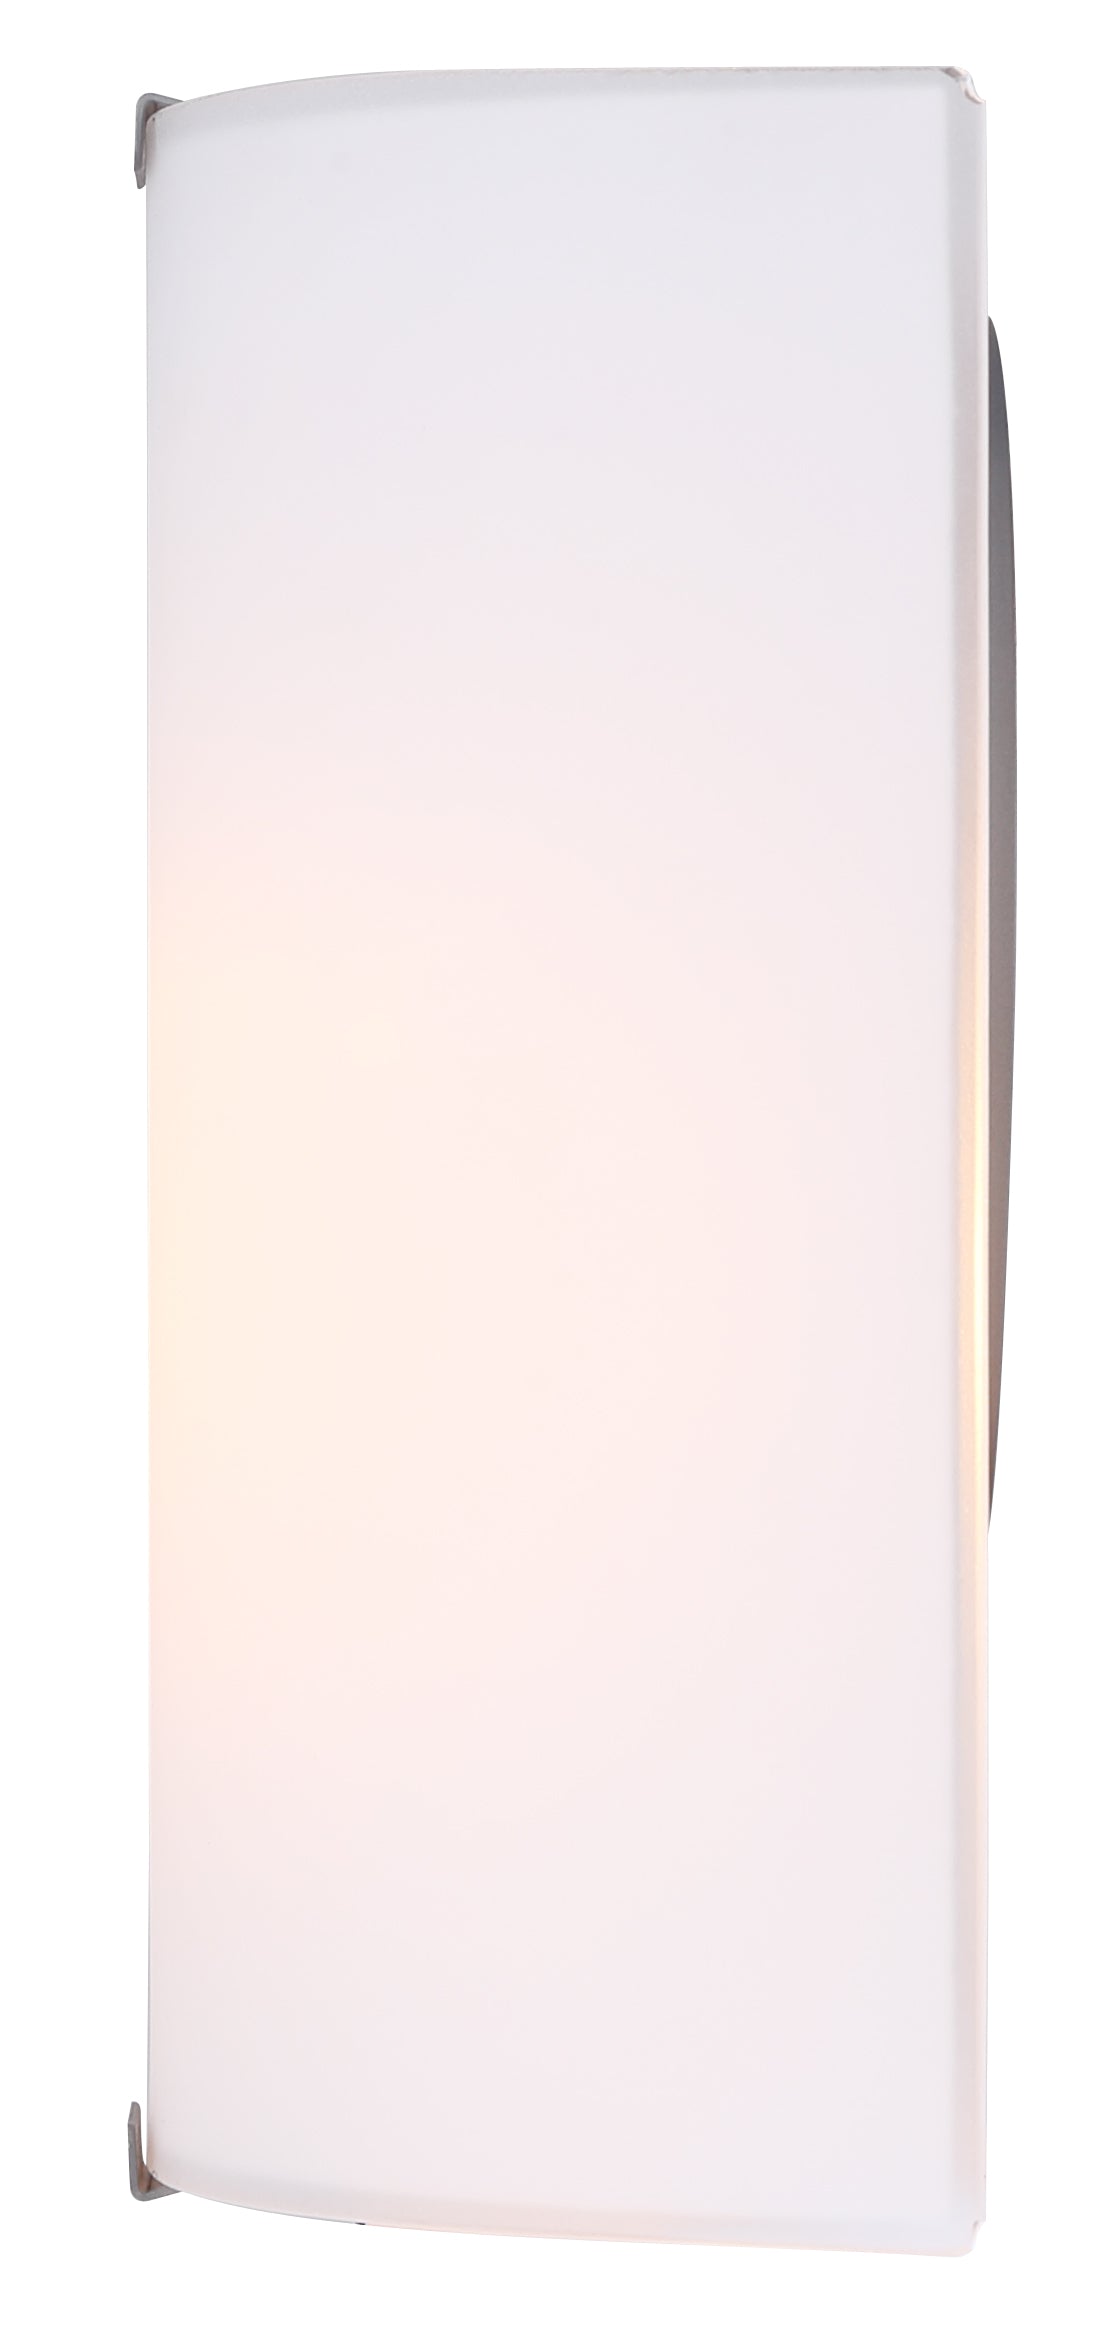 side view of a single grey cold and plug light with a white shade.  The light is a rectangle shape